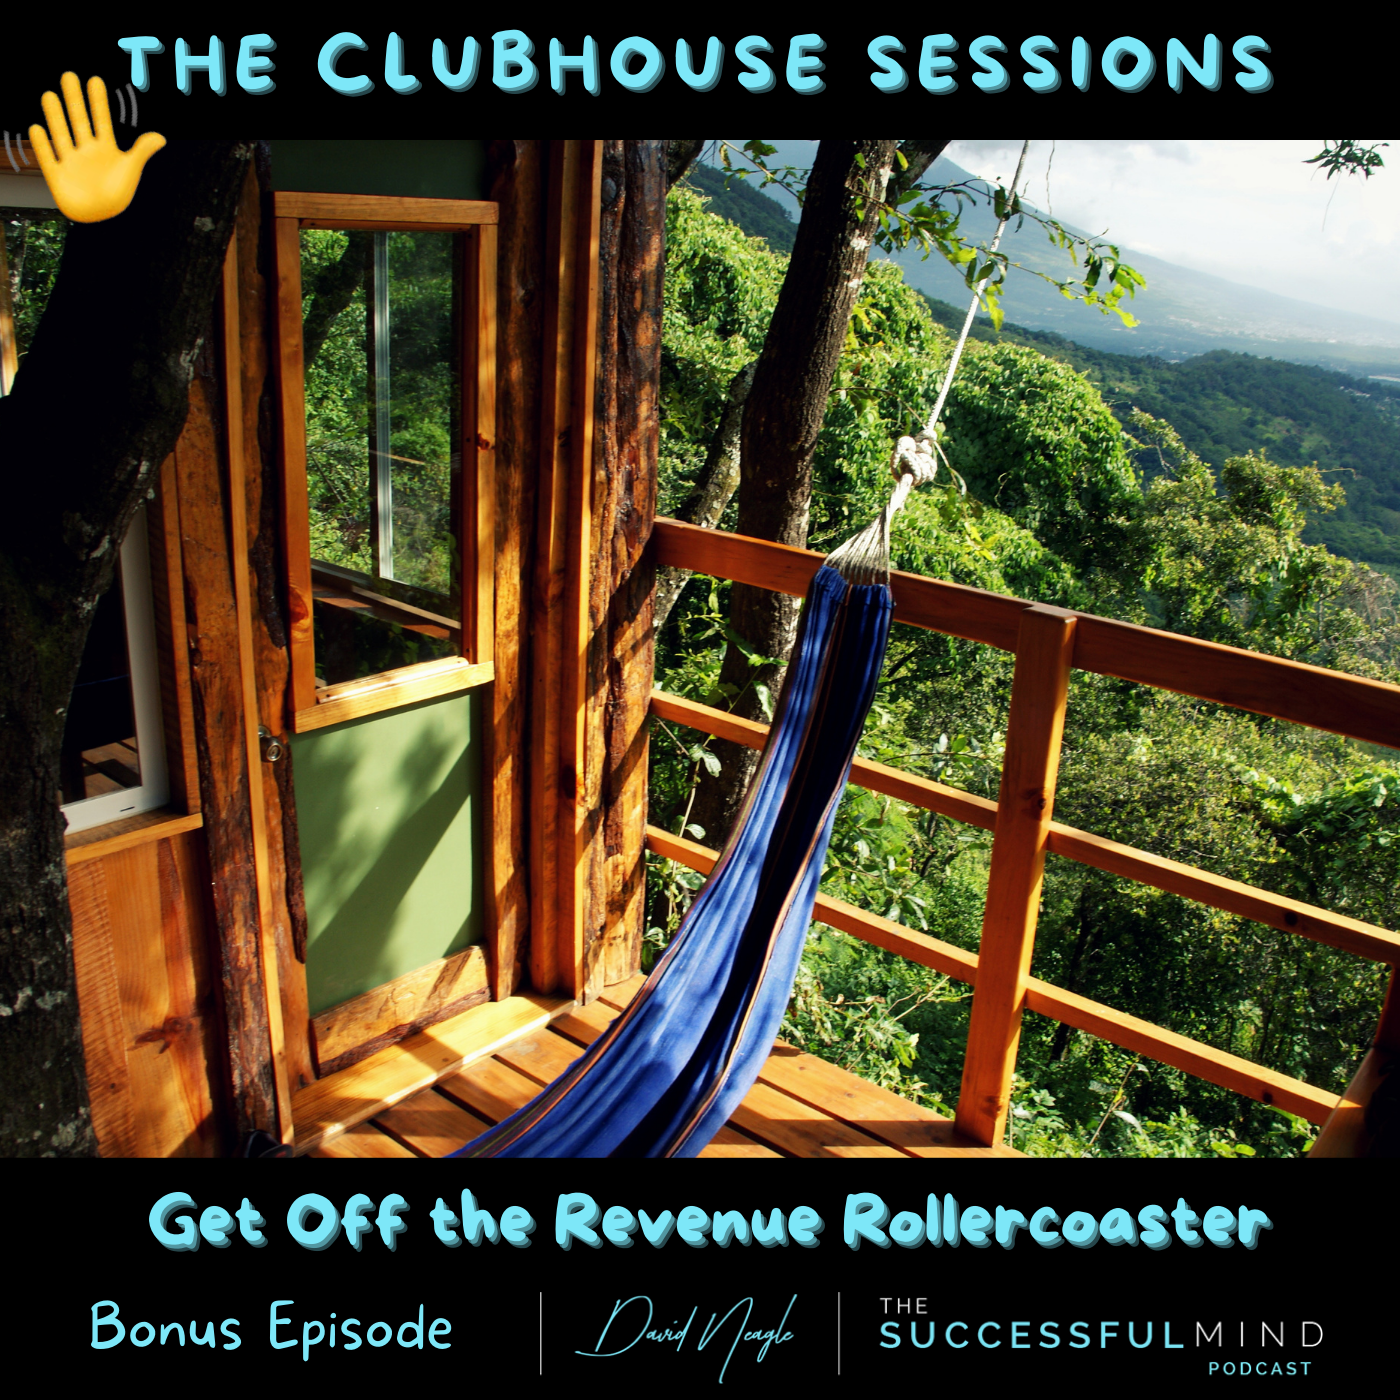 The Clubhouse Sessions - Get Off the Revenue Rollercoaster